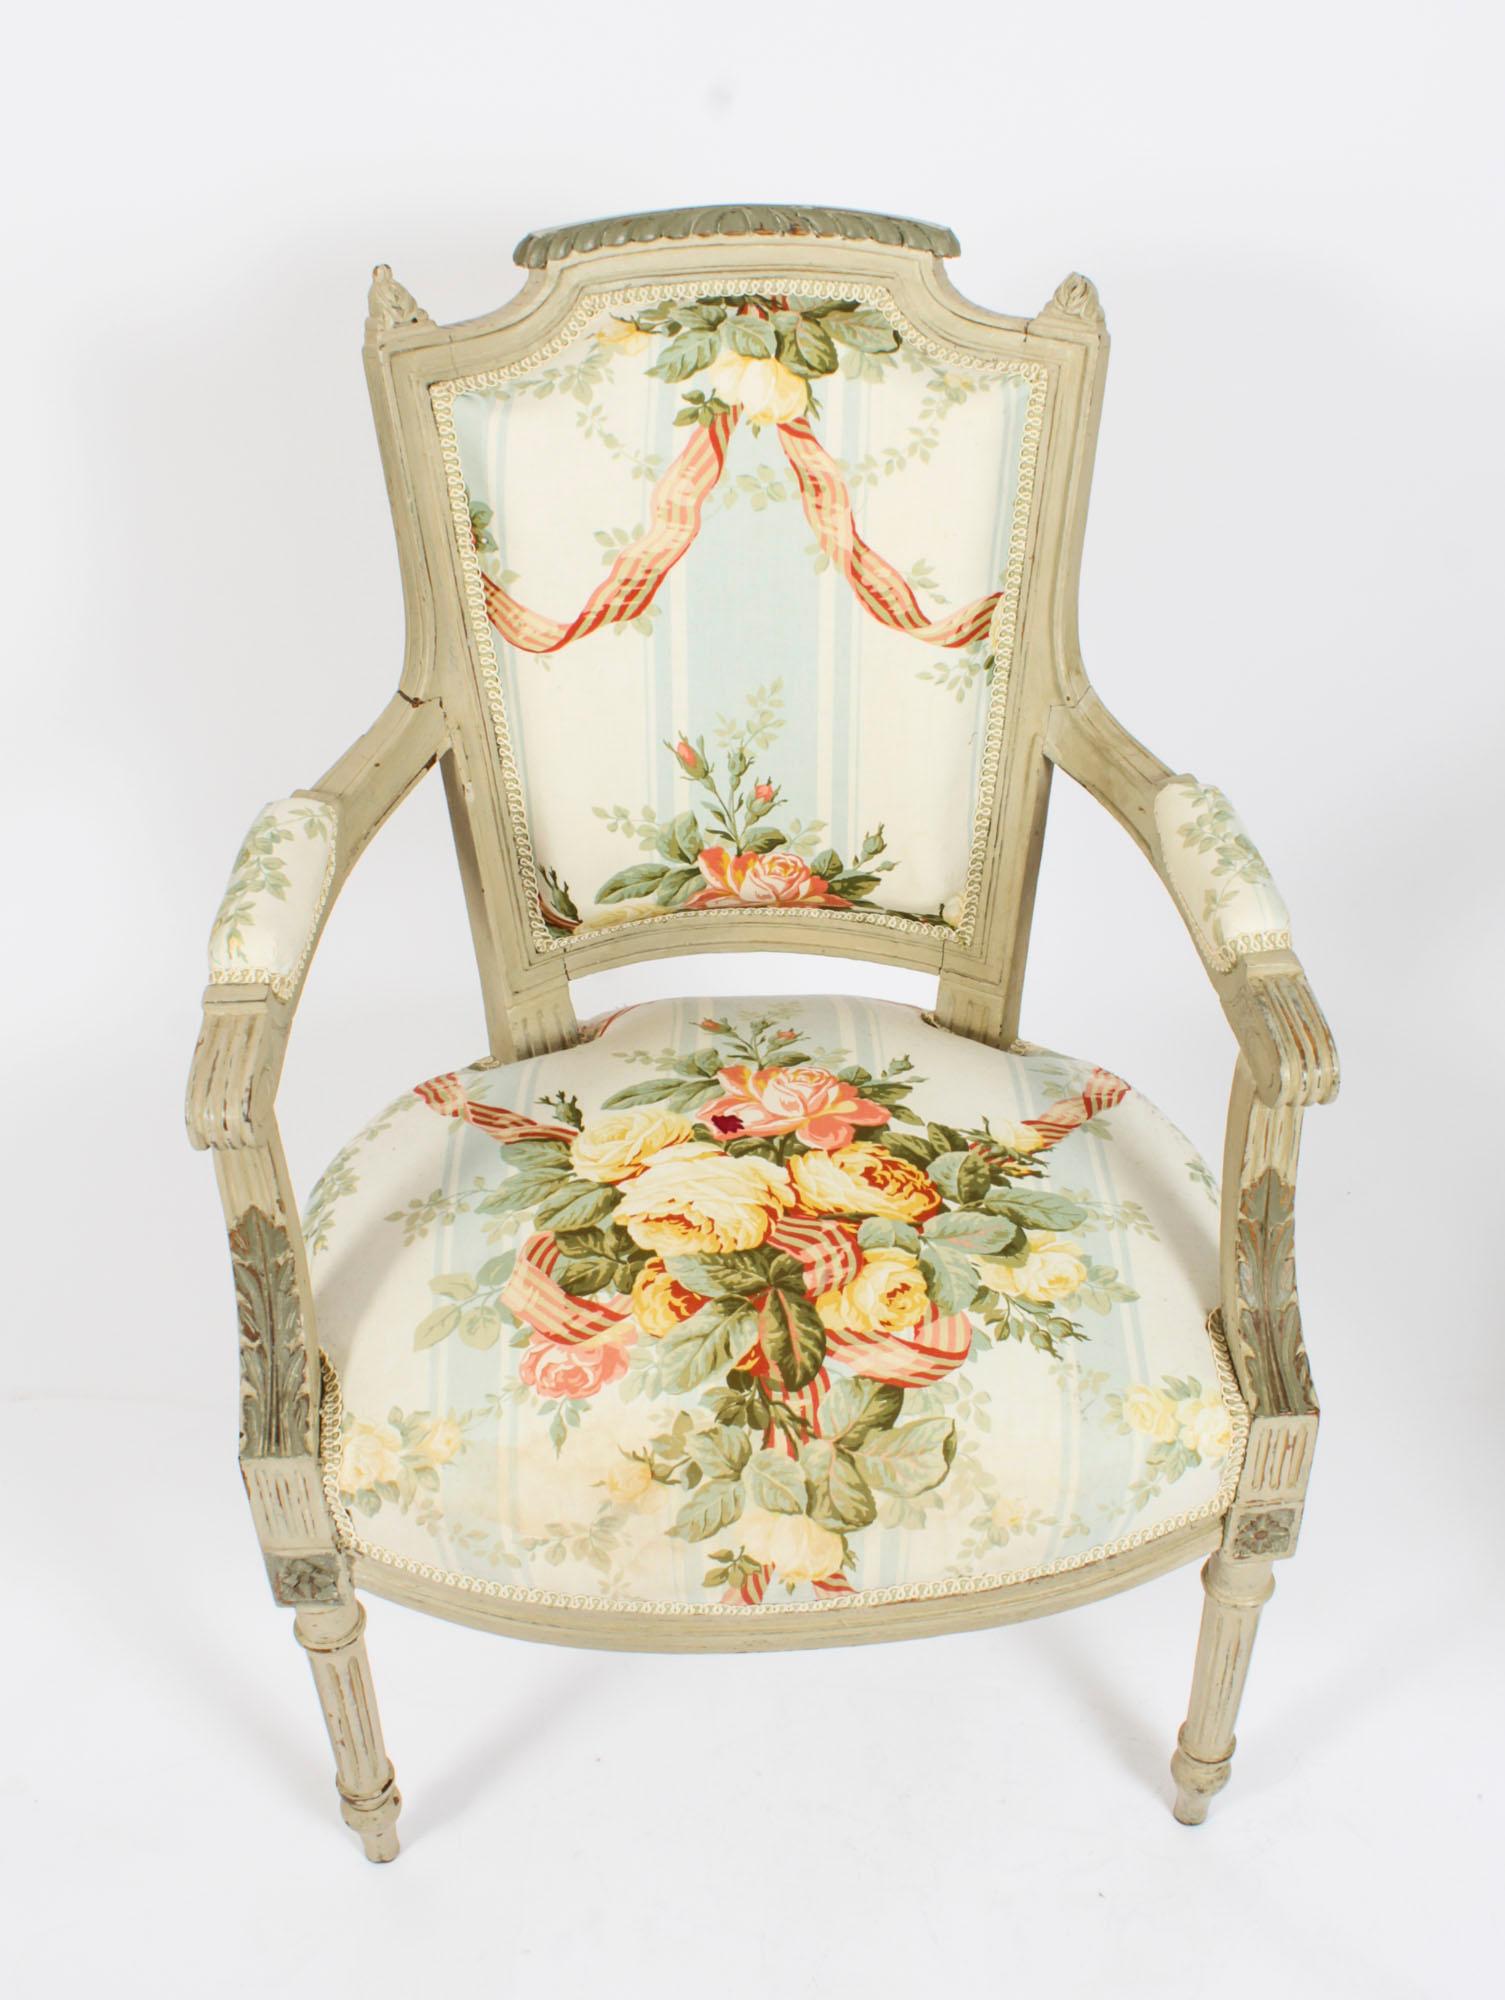 Antique Pair French Louis XVI Revival Painted Fauteuil Armchairs, 19th Century In Good Condition For Sale In London, GB